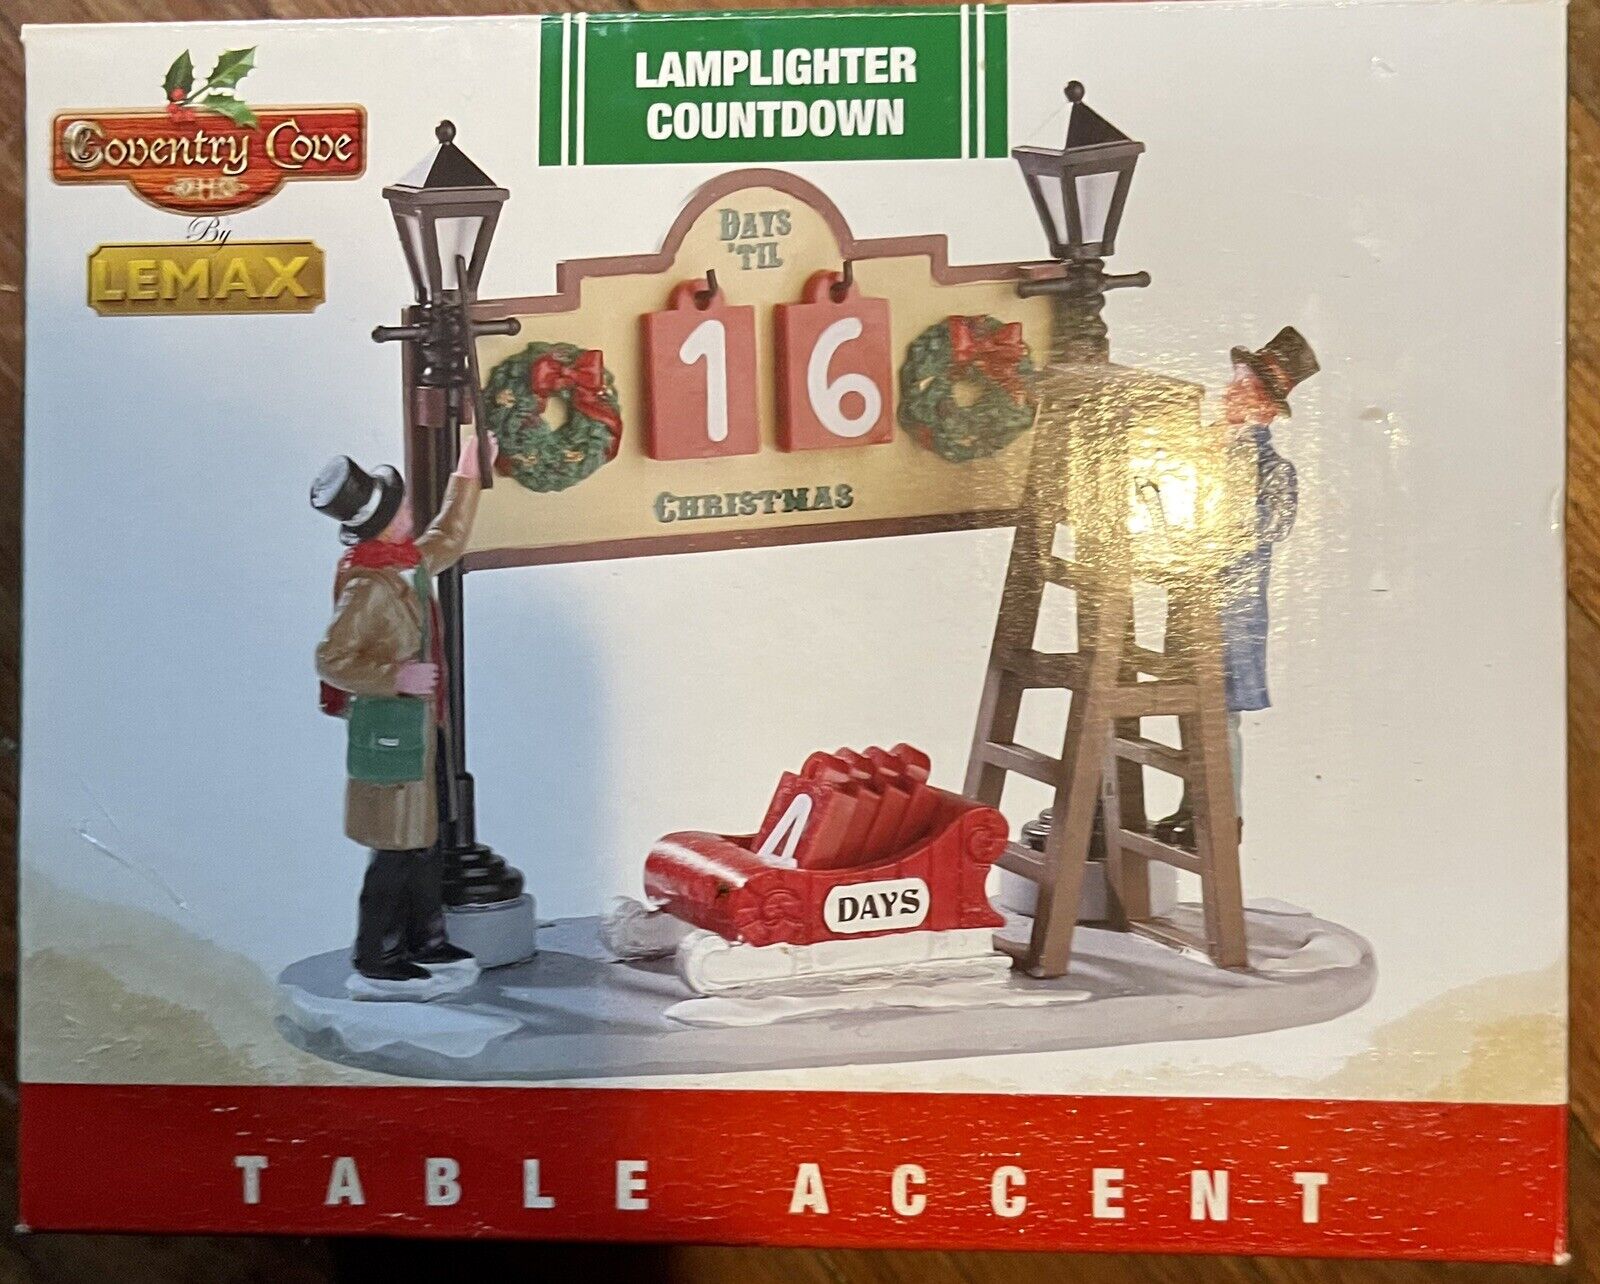 Lemax Coventry Cove Lamplighter COUNTDOWN CALENDAR Christmas Table Accent 53213